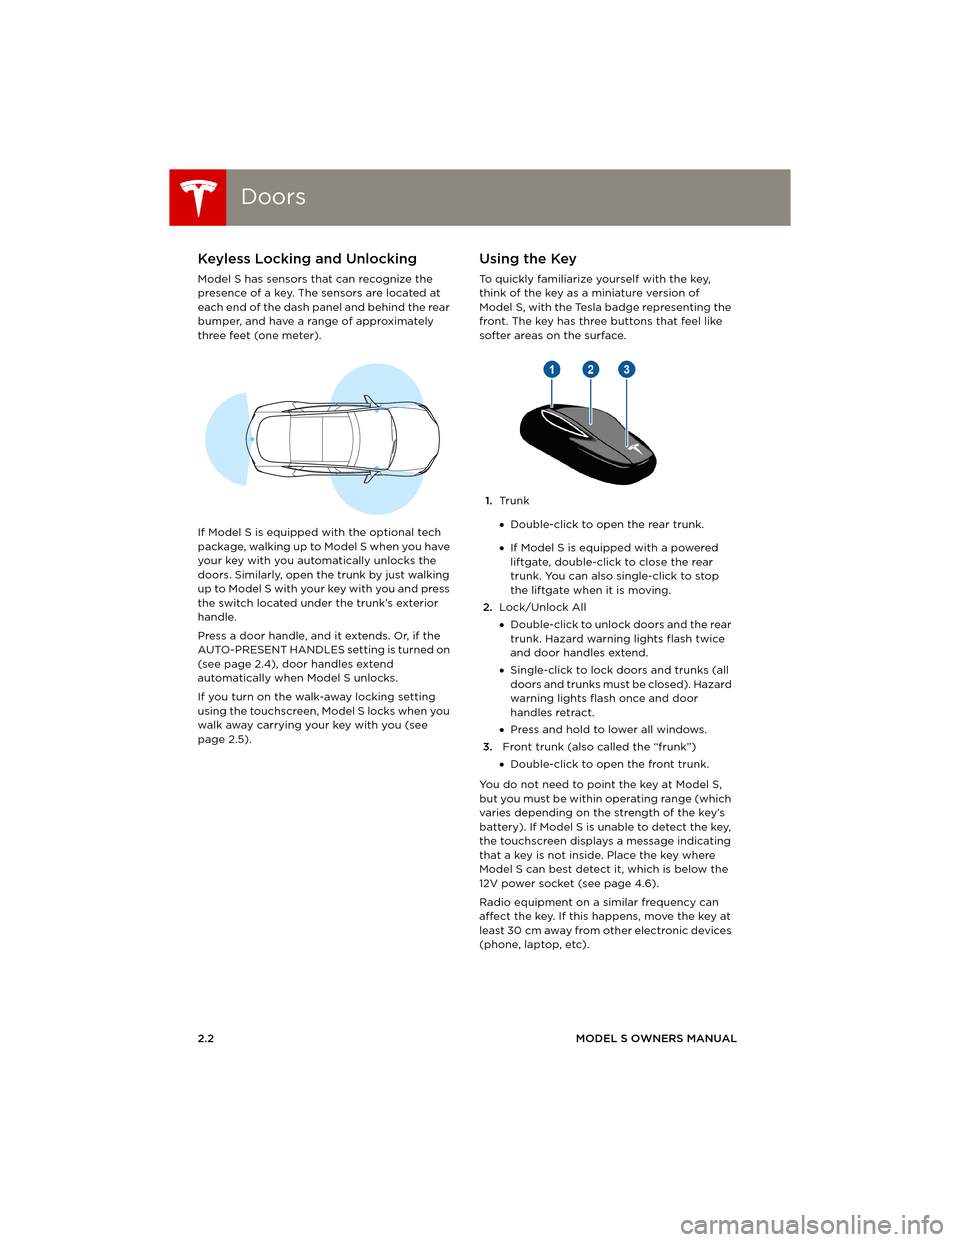 TESLA MODEL S 2014  Owners manual (Europe) DoorsDoors
2.2MODEL S OWNERS MANUAL
OPENING AND CLOSING
DoorsKeyless Locking and Unlocking
Model S has sensors that can recognize the 
presence of a key. The sensors are located at 
each end of the da